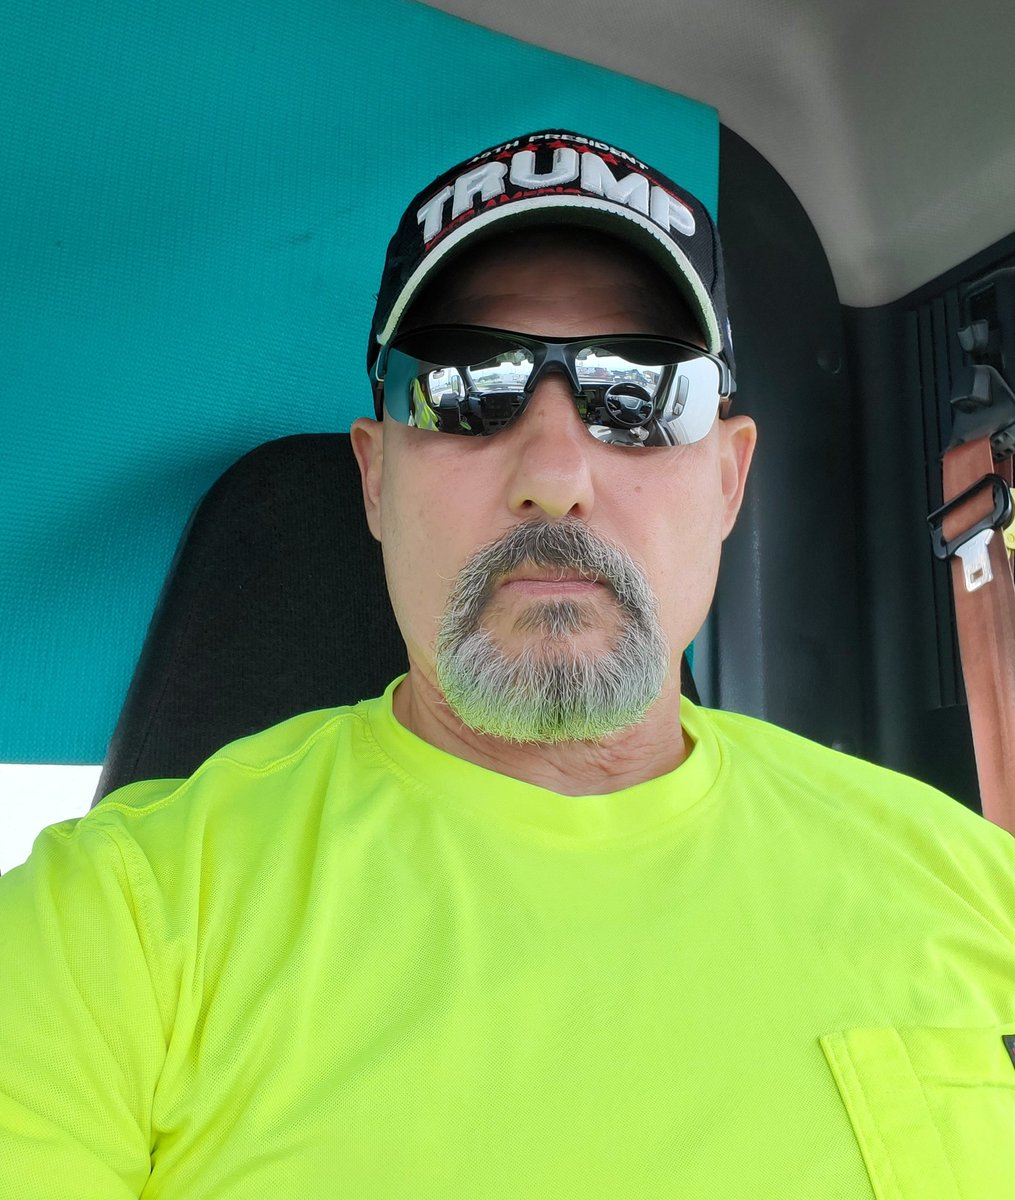 I'm at a Loves Truckstop in Lebanon, IN and went in to get some eats, i got so many compliments and thumbs 👍 up on my hat...just awesome, only Trump can get all the support of all these Truckers... fuck yeah 👊

TRUCKERS FOR TRUMP 👇 WHO'S WITH ME